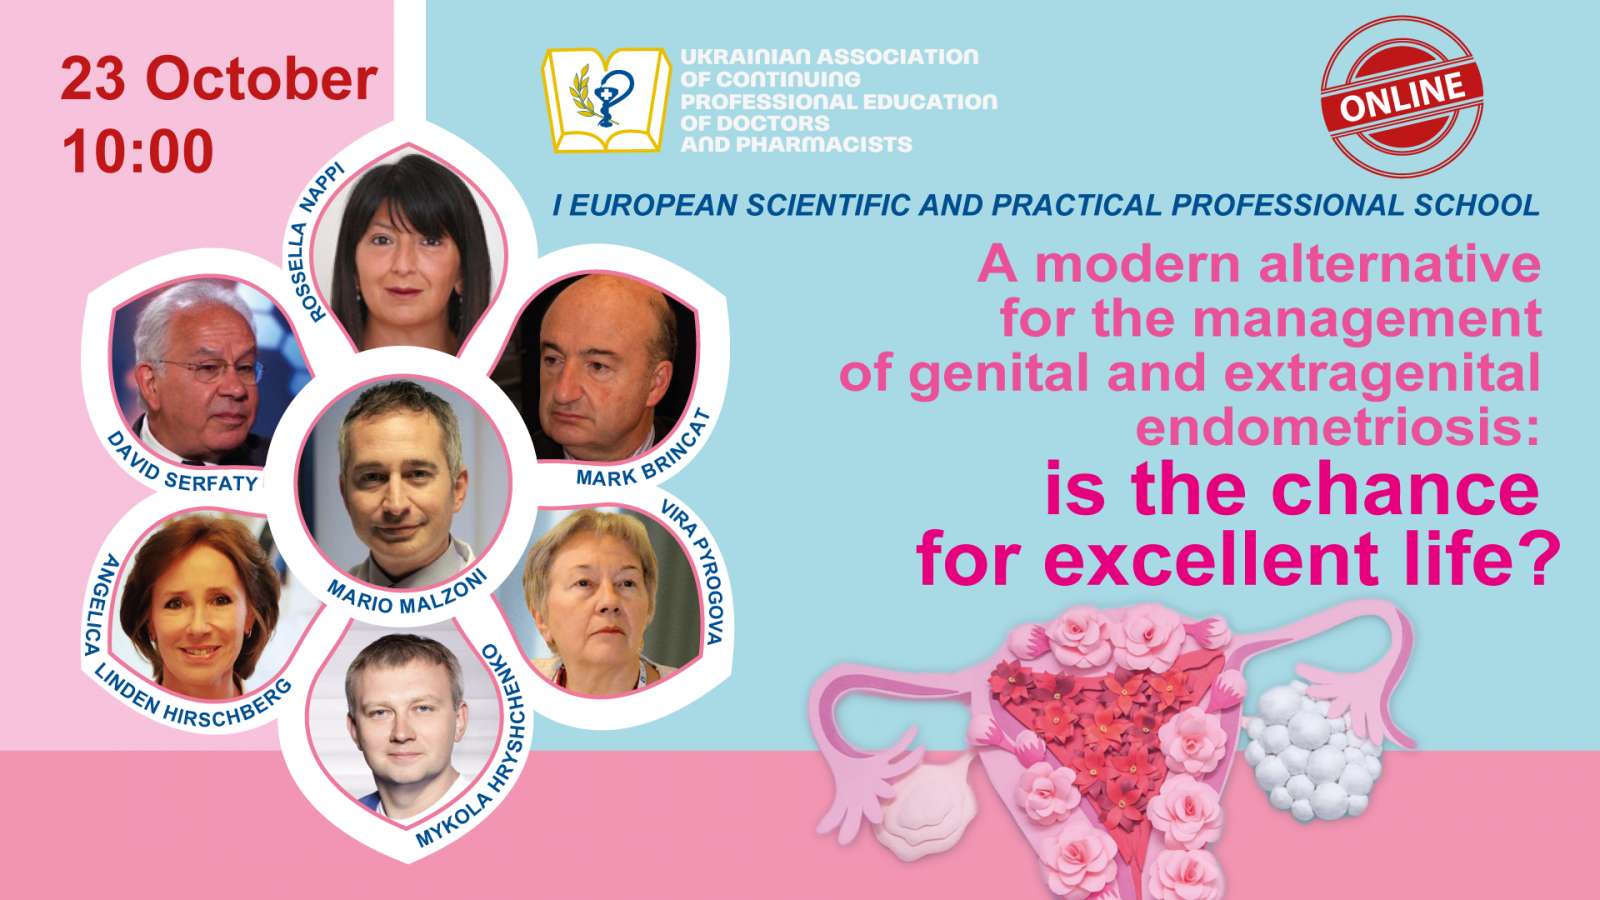 A modern alternative for the management of genital and extragenital endometriosis: is the chance for excellent life?